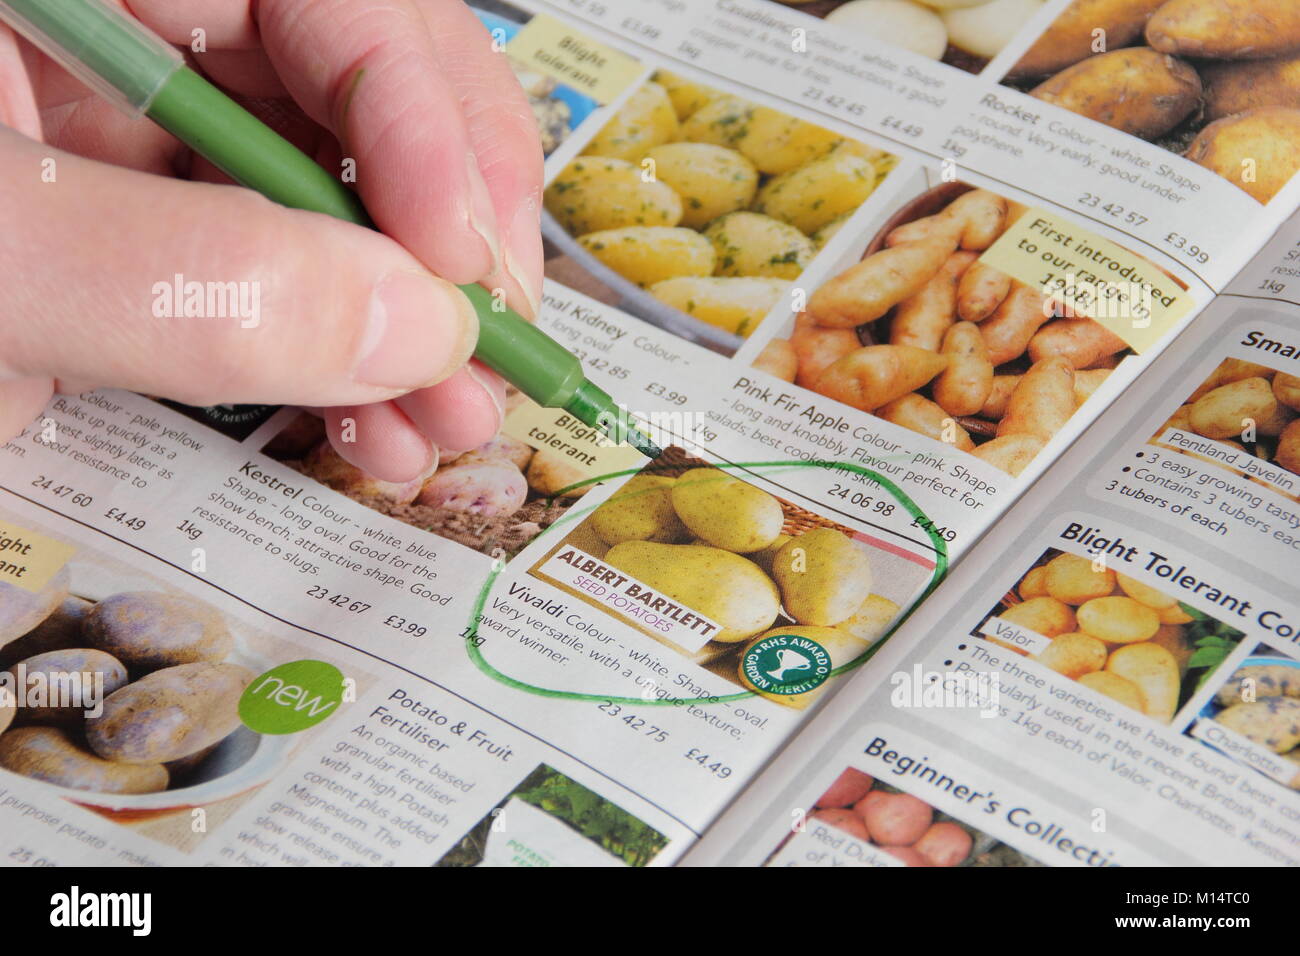 Ordering seed potatoes from a catalogue in winter (January), UK Stock Photo